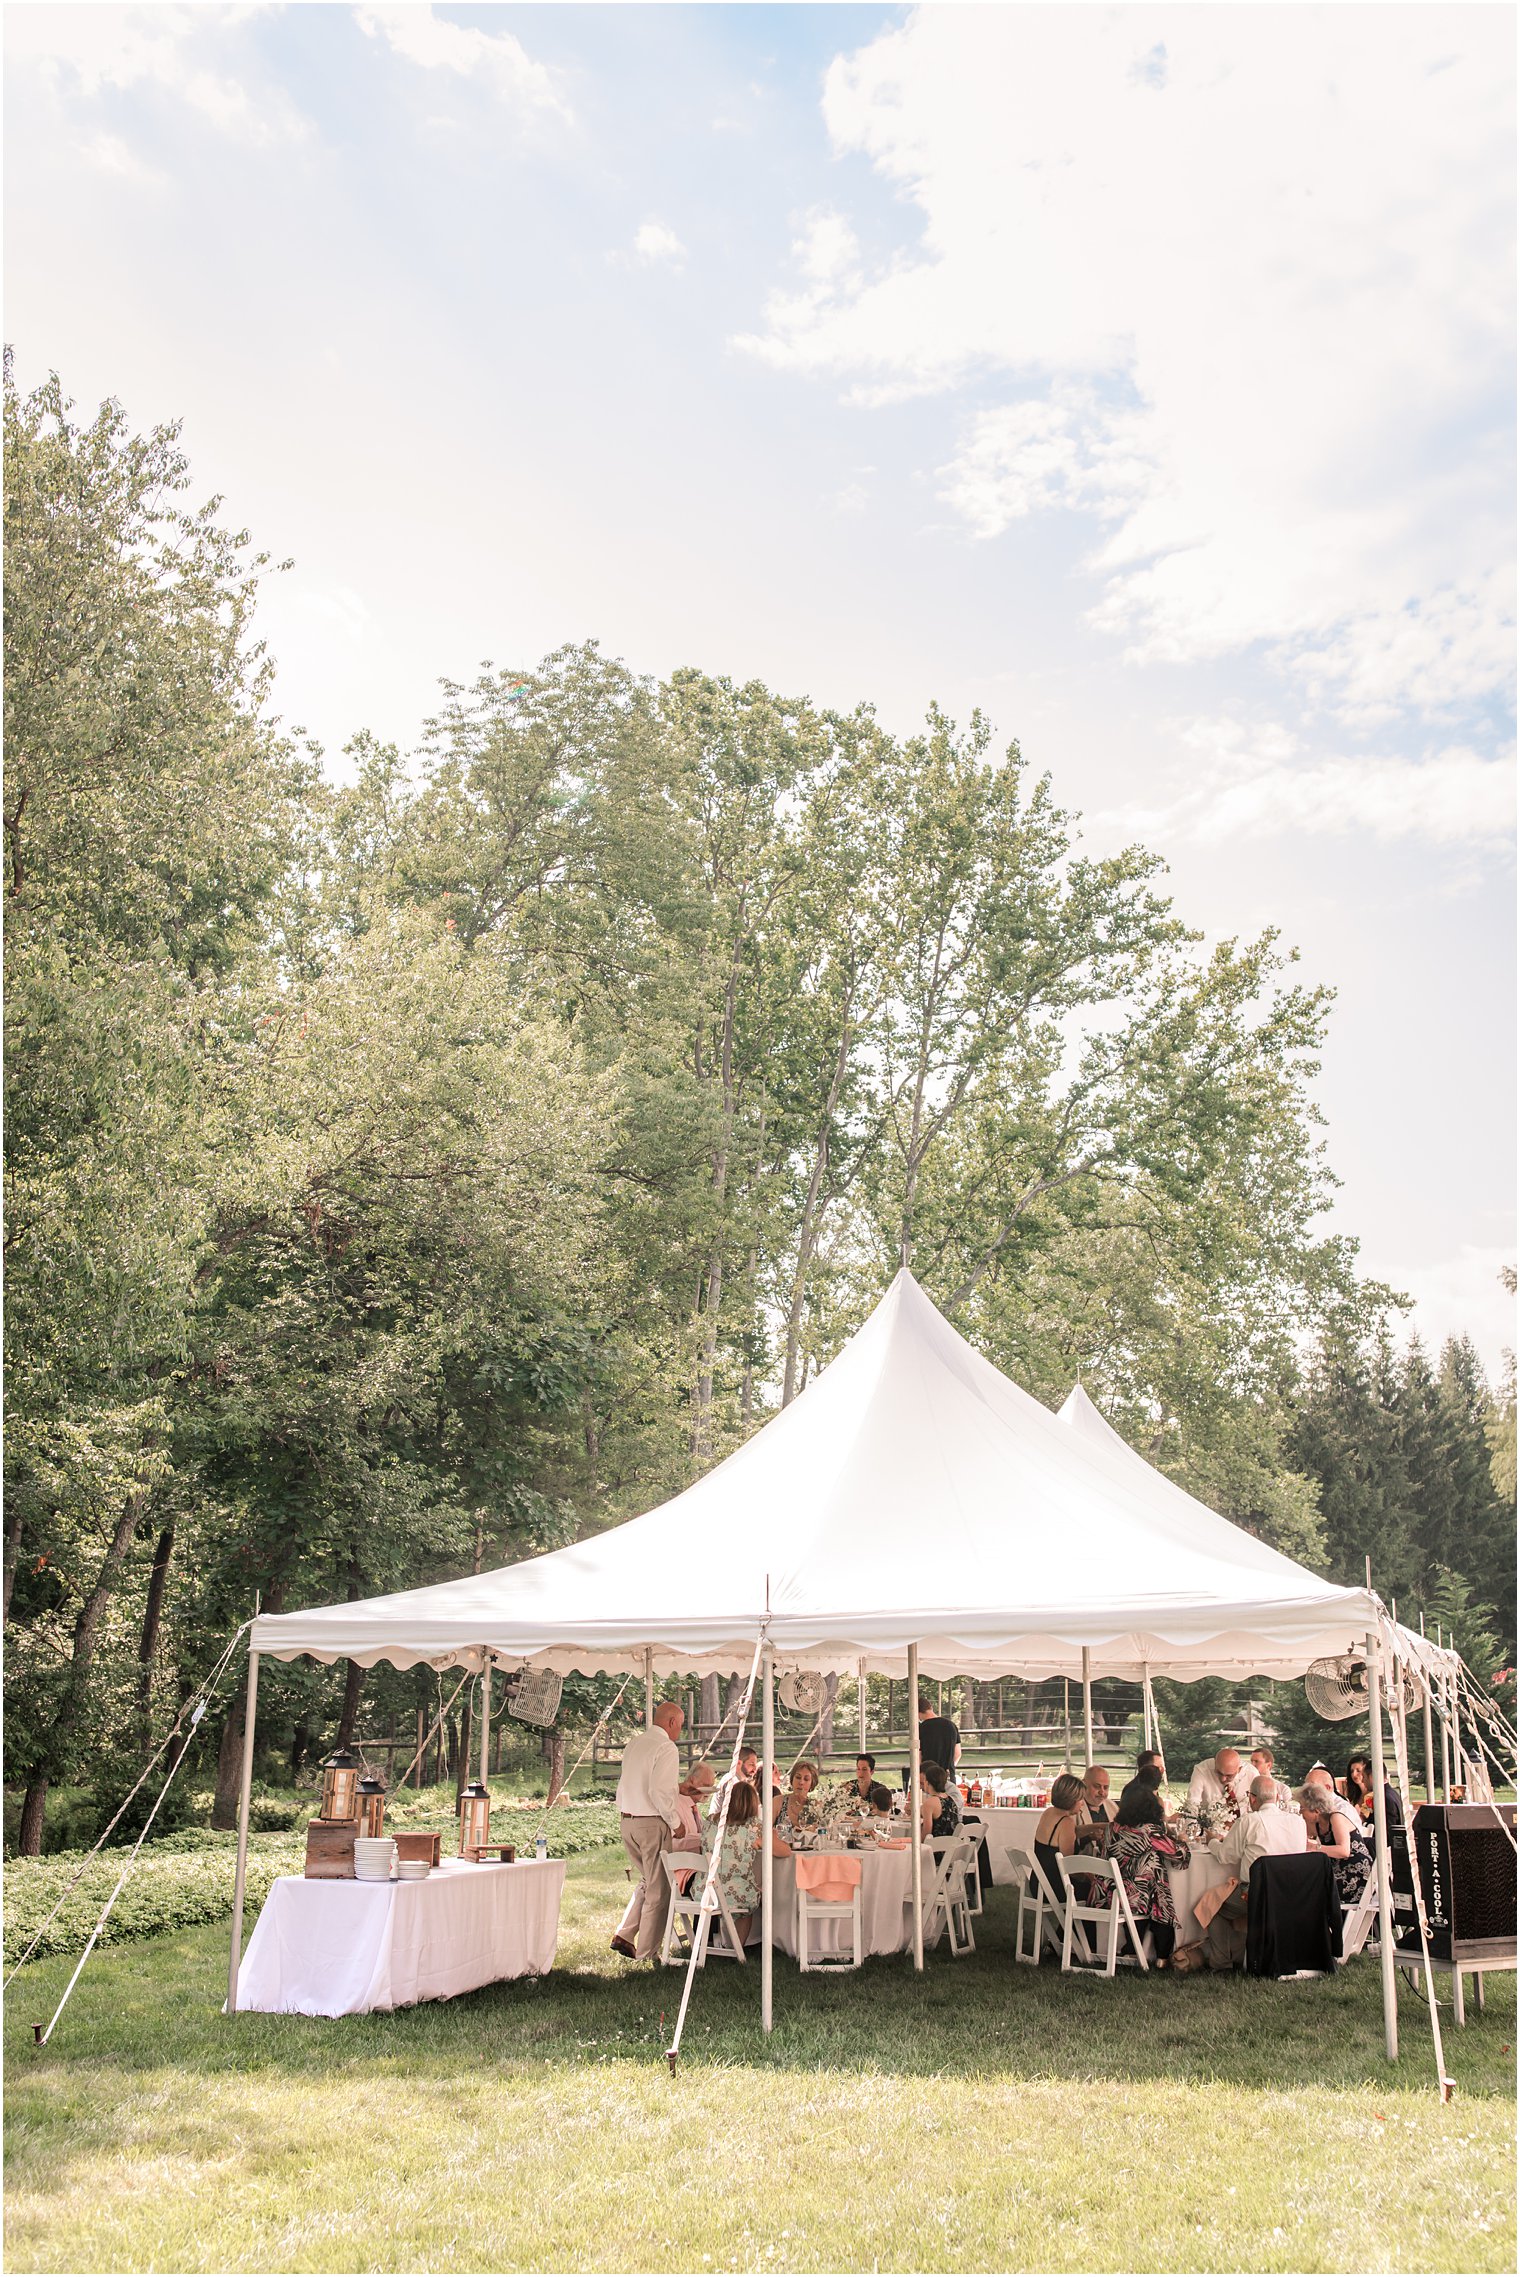 Tented reception during intimate wedding during COVID-19